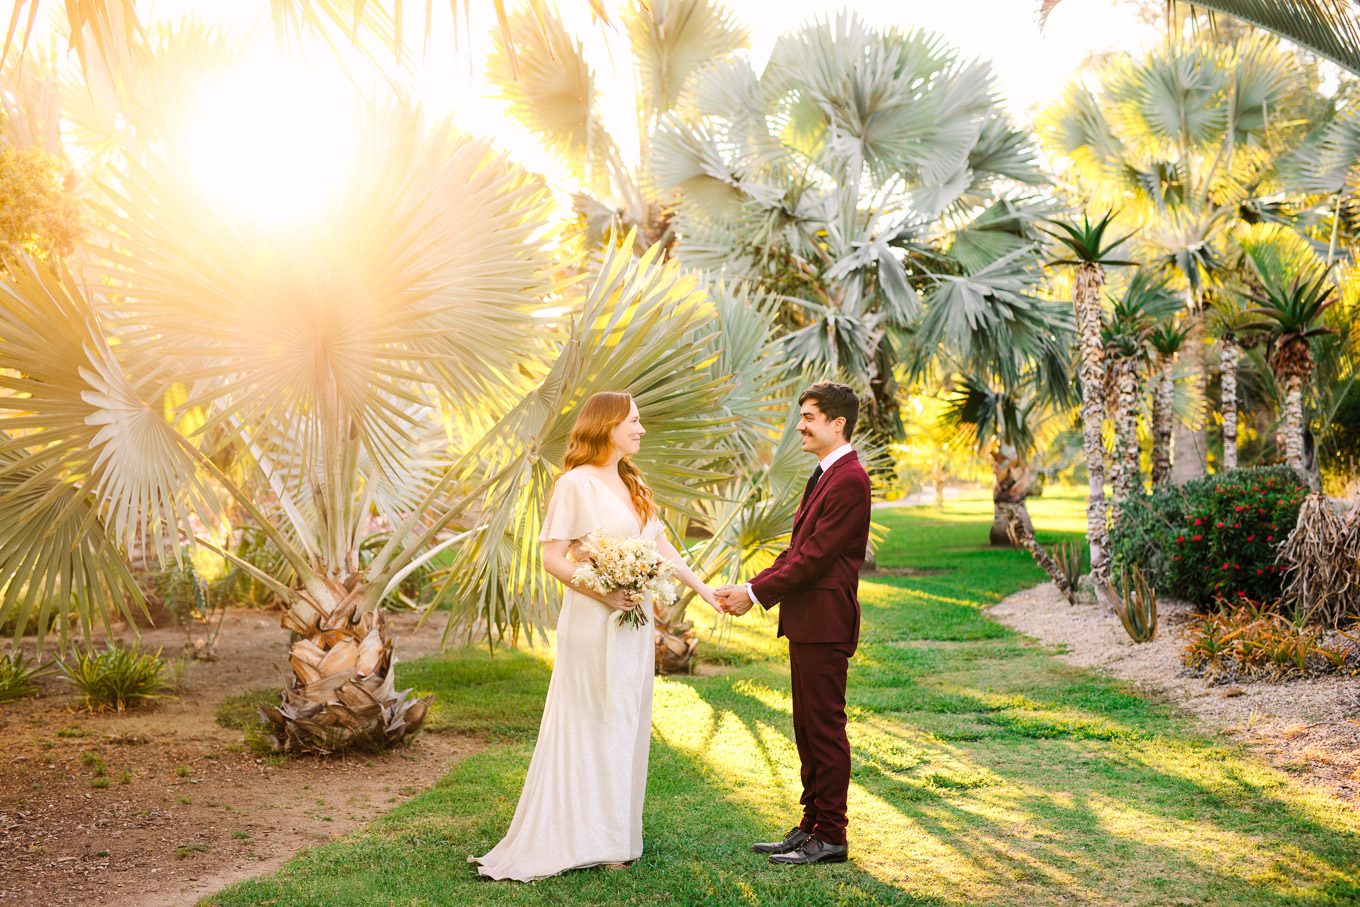 Bride and groom in lush palm garden at sunset | Los Angeles Arboretum Elopement | Colorful and elevated wedding photography for fun-loving couples in Southern California | #LosAngelesElopement #elopement #LAarboretum #LAskyline #elopementphotos   Source: Mary Costa Photography | Los Angeles